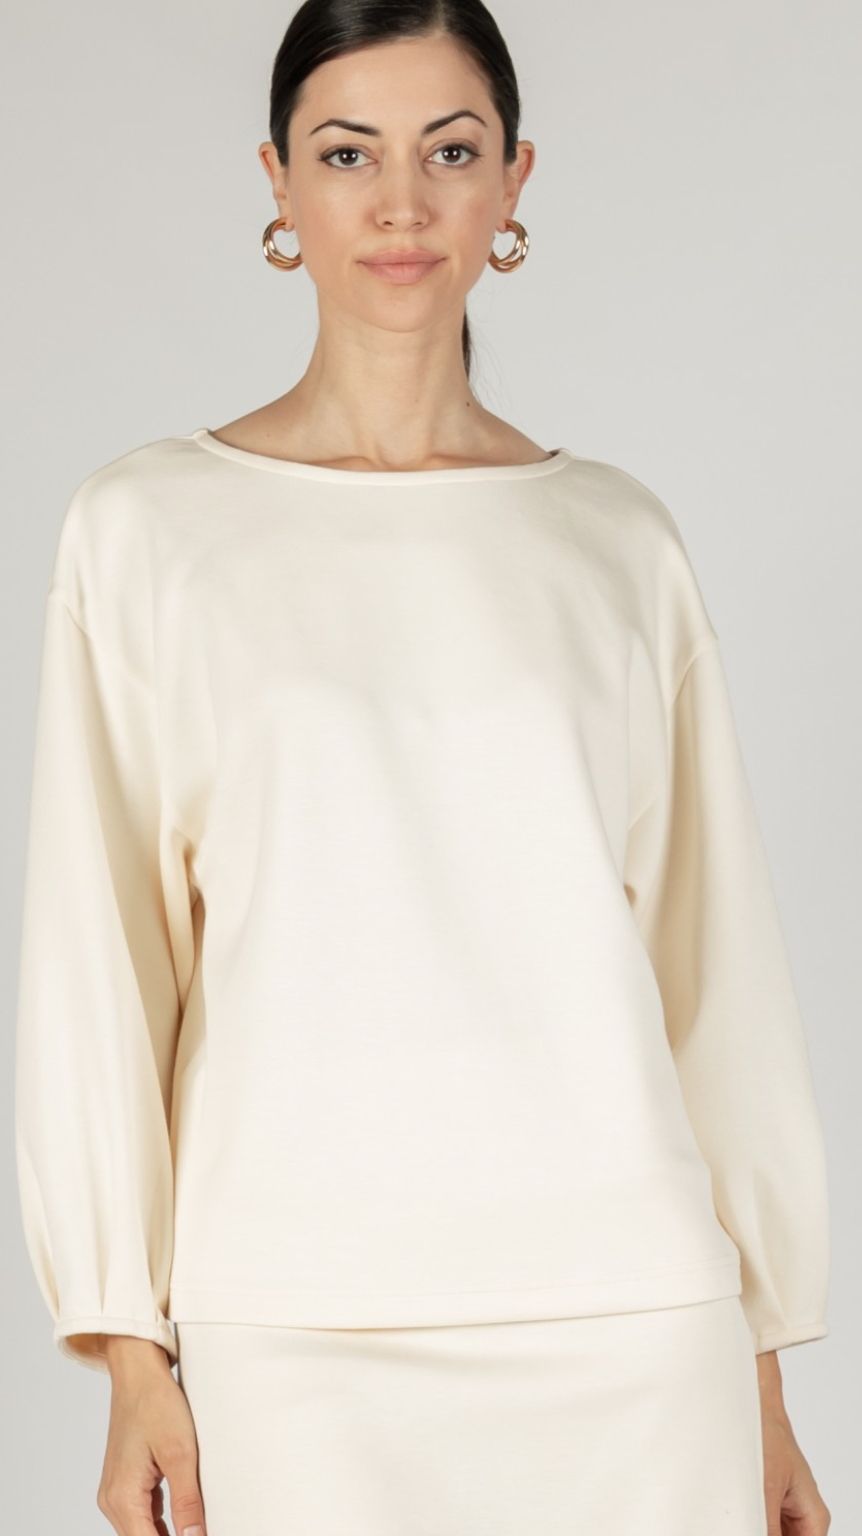 P. CILL Butter Modal Dropped Shoulder Top